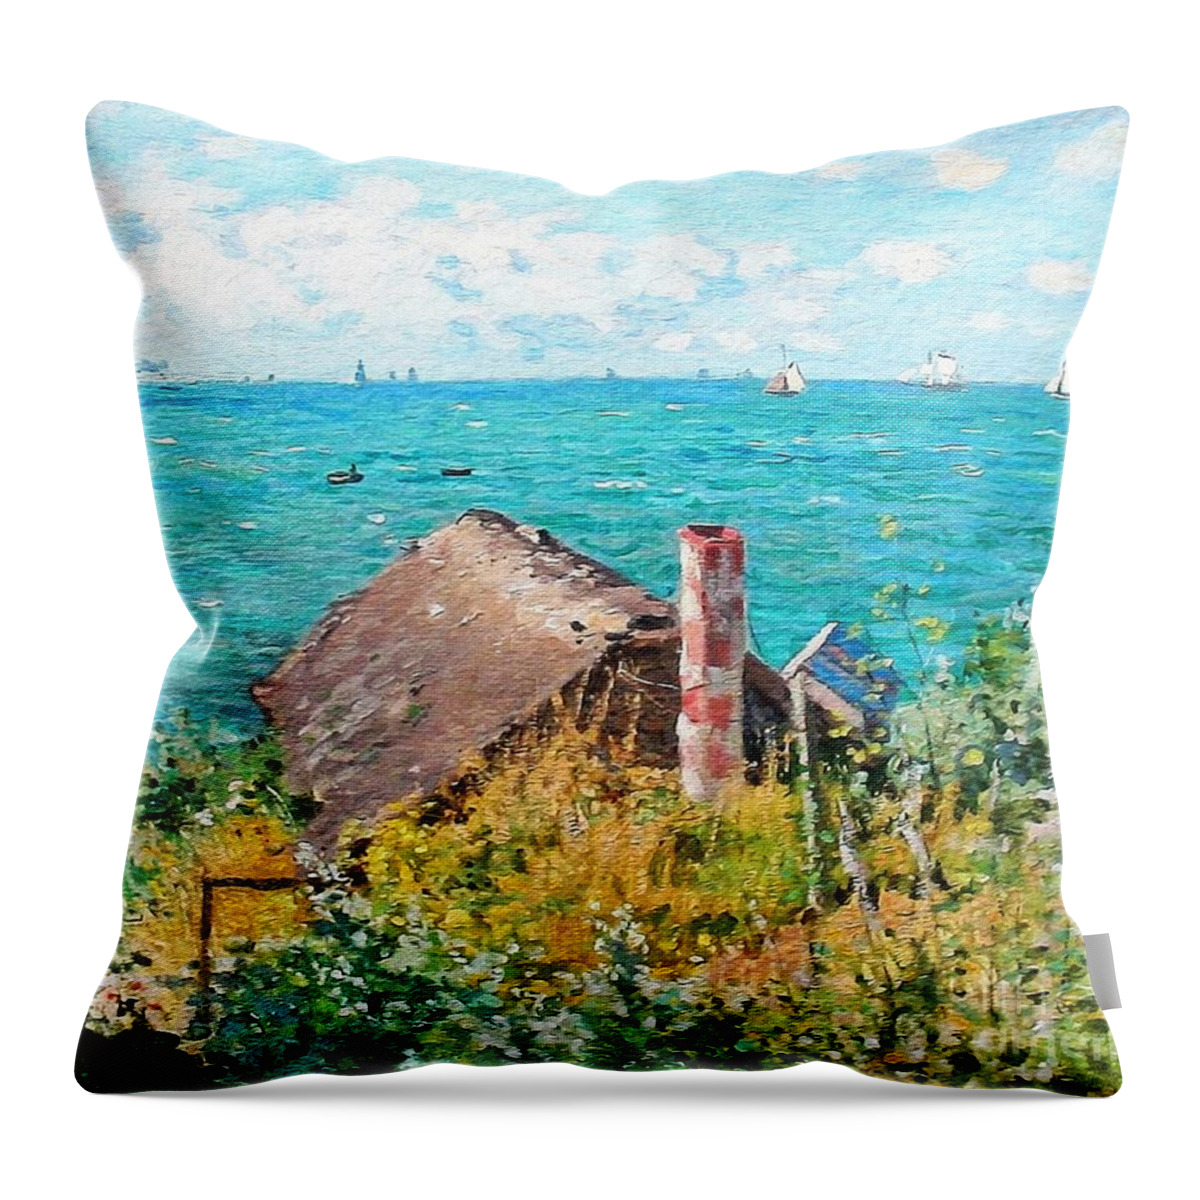 Claude Monet Throw Pillow featuring the painting The Cabin At Saint-Adresse by Claude Monet